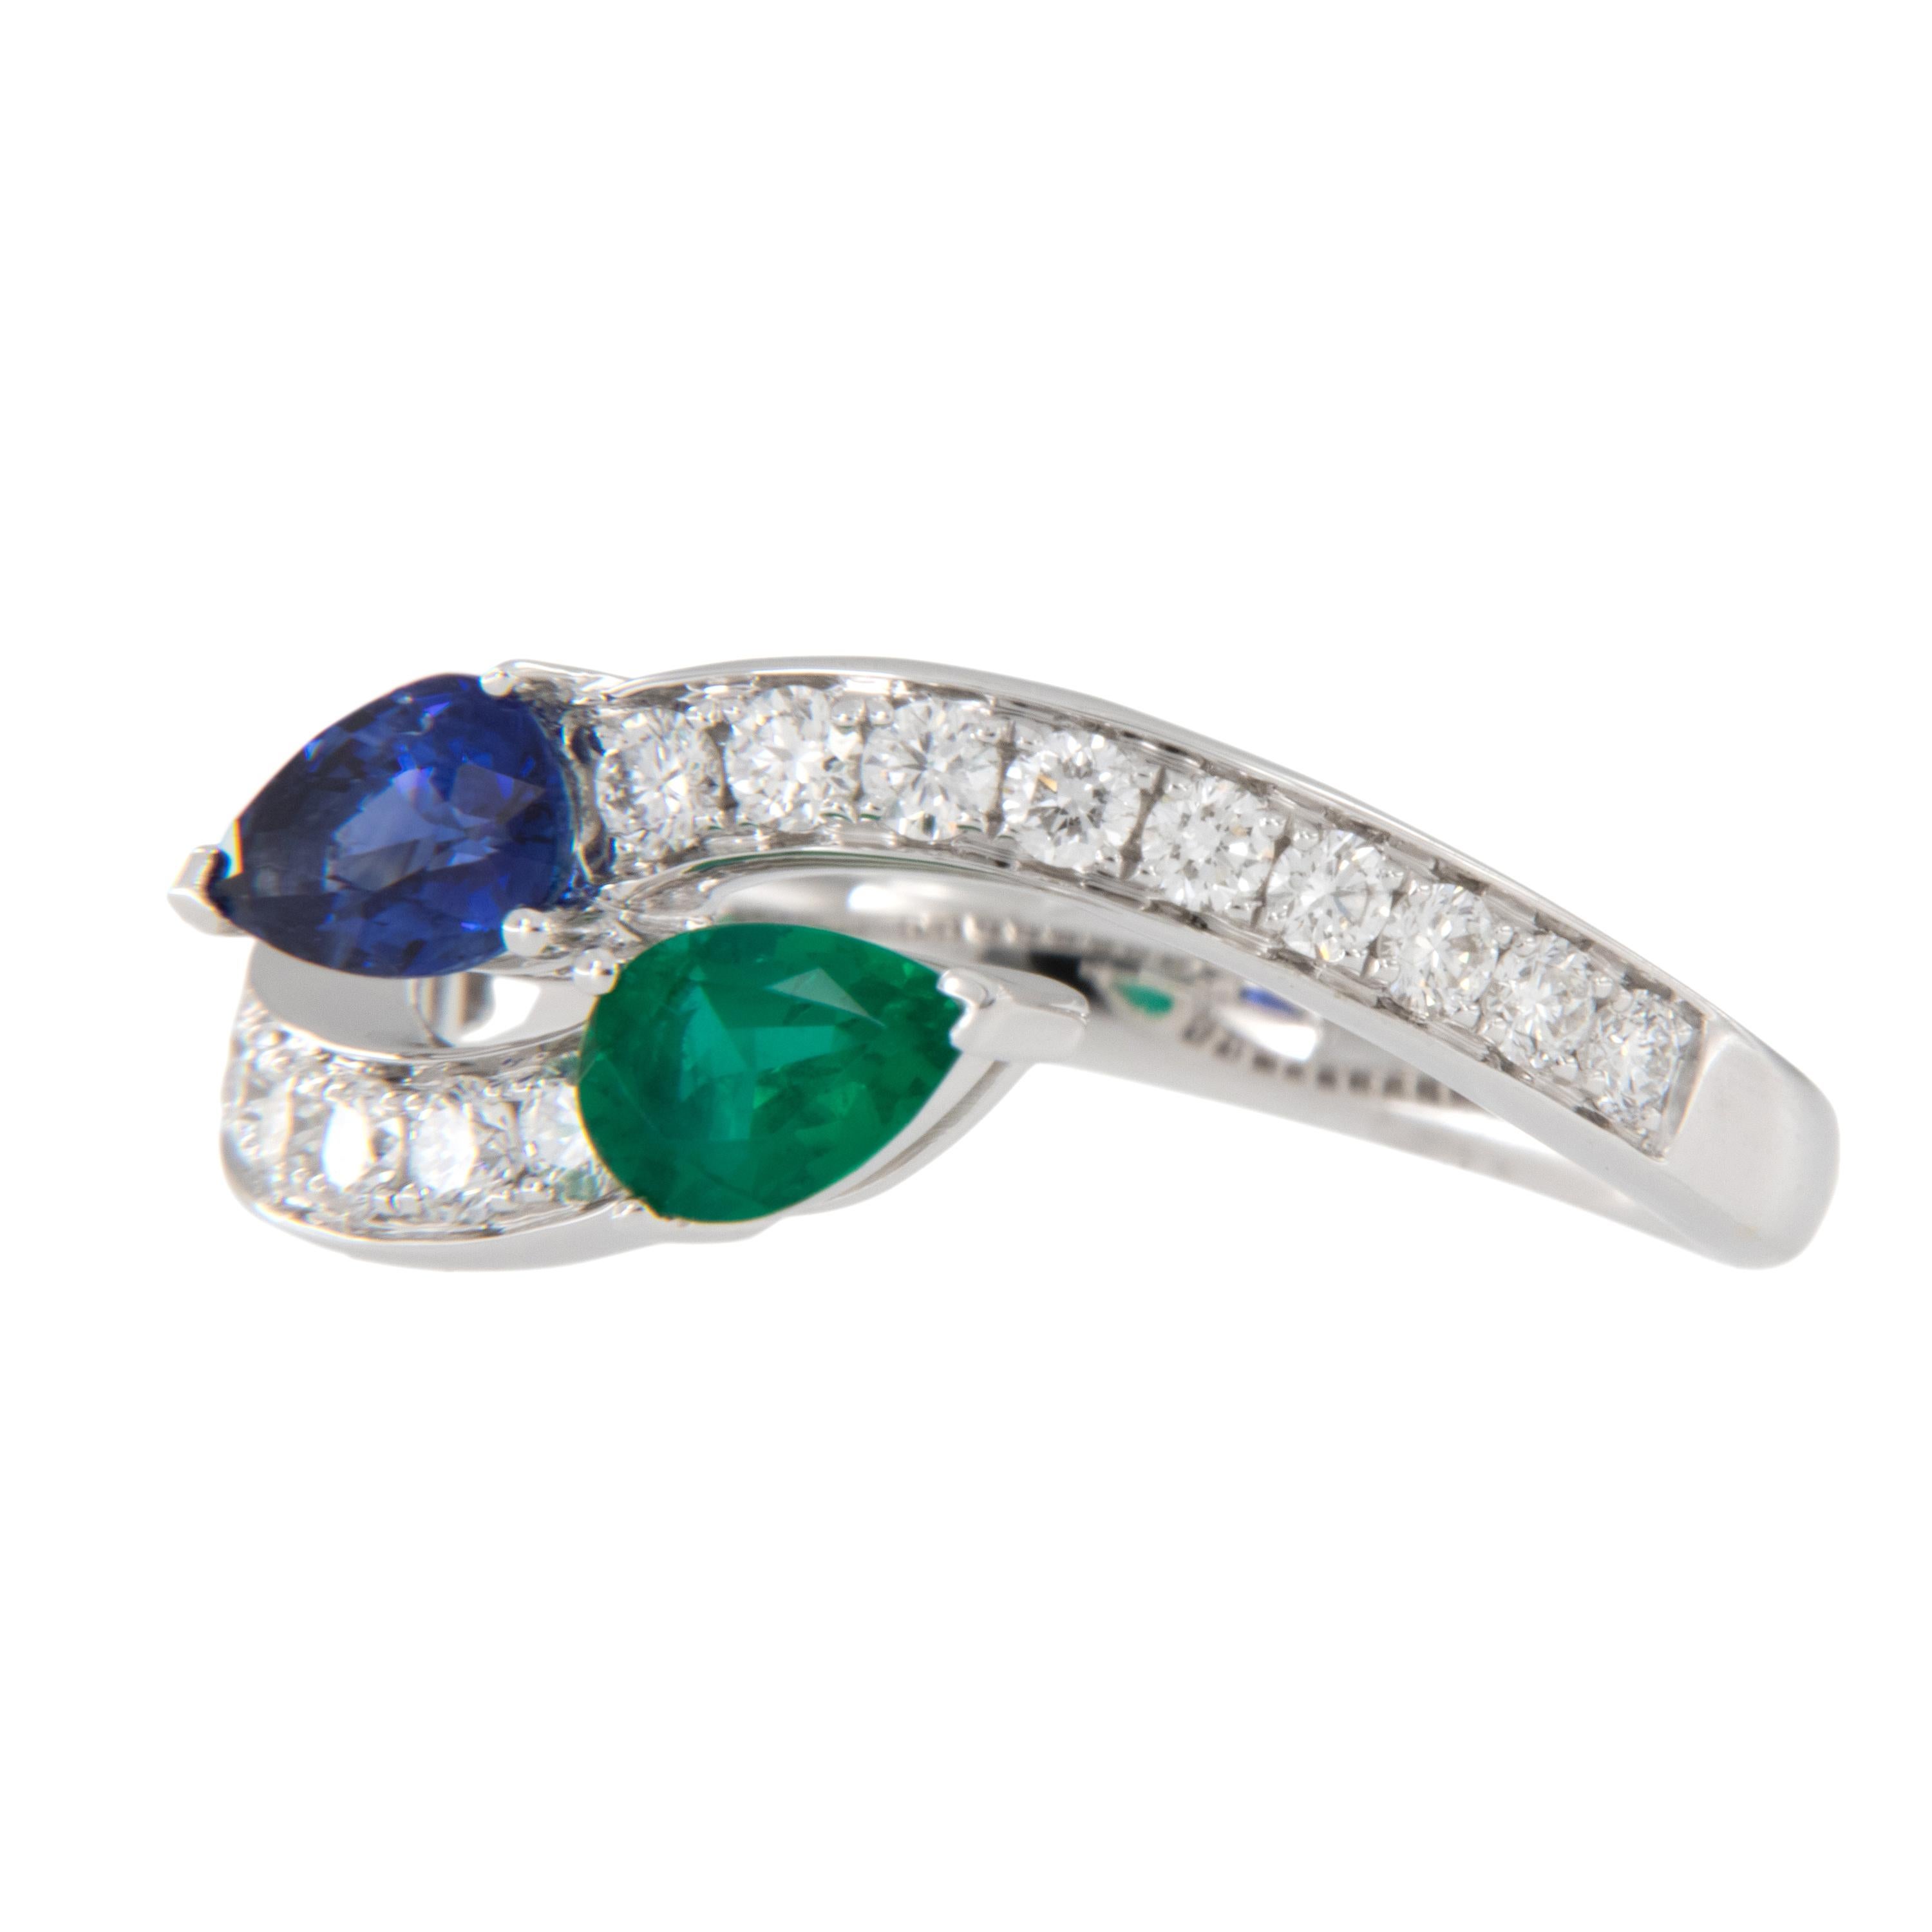 This is the ultimate right hand ring! Bypass rings have been around since the Victorian era. Characterized by bands that overlap and part they are sought after due to their distinctive style representing individuality and fluidity. Blue & green are